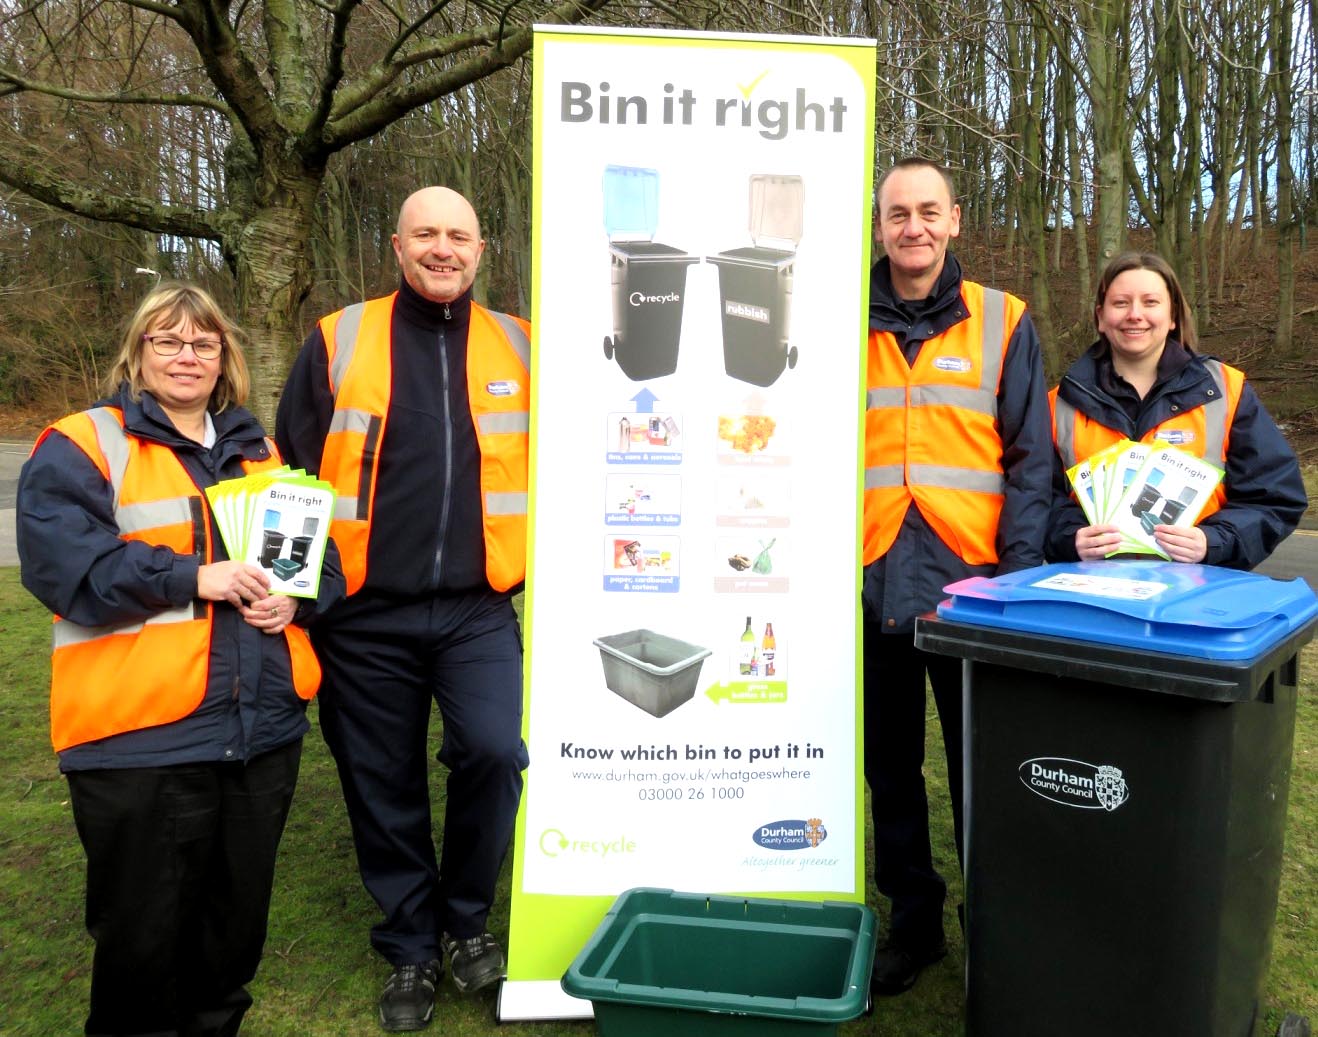 Council’s Recycling Campaign Extended